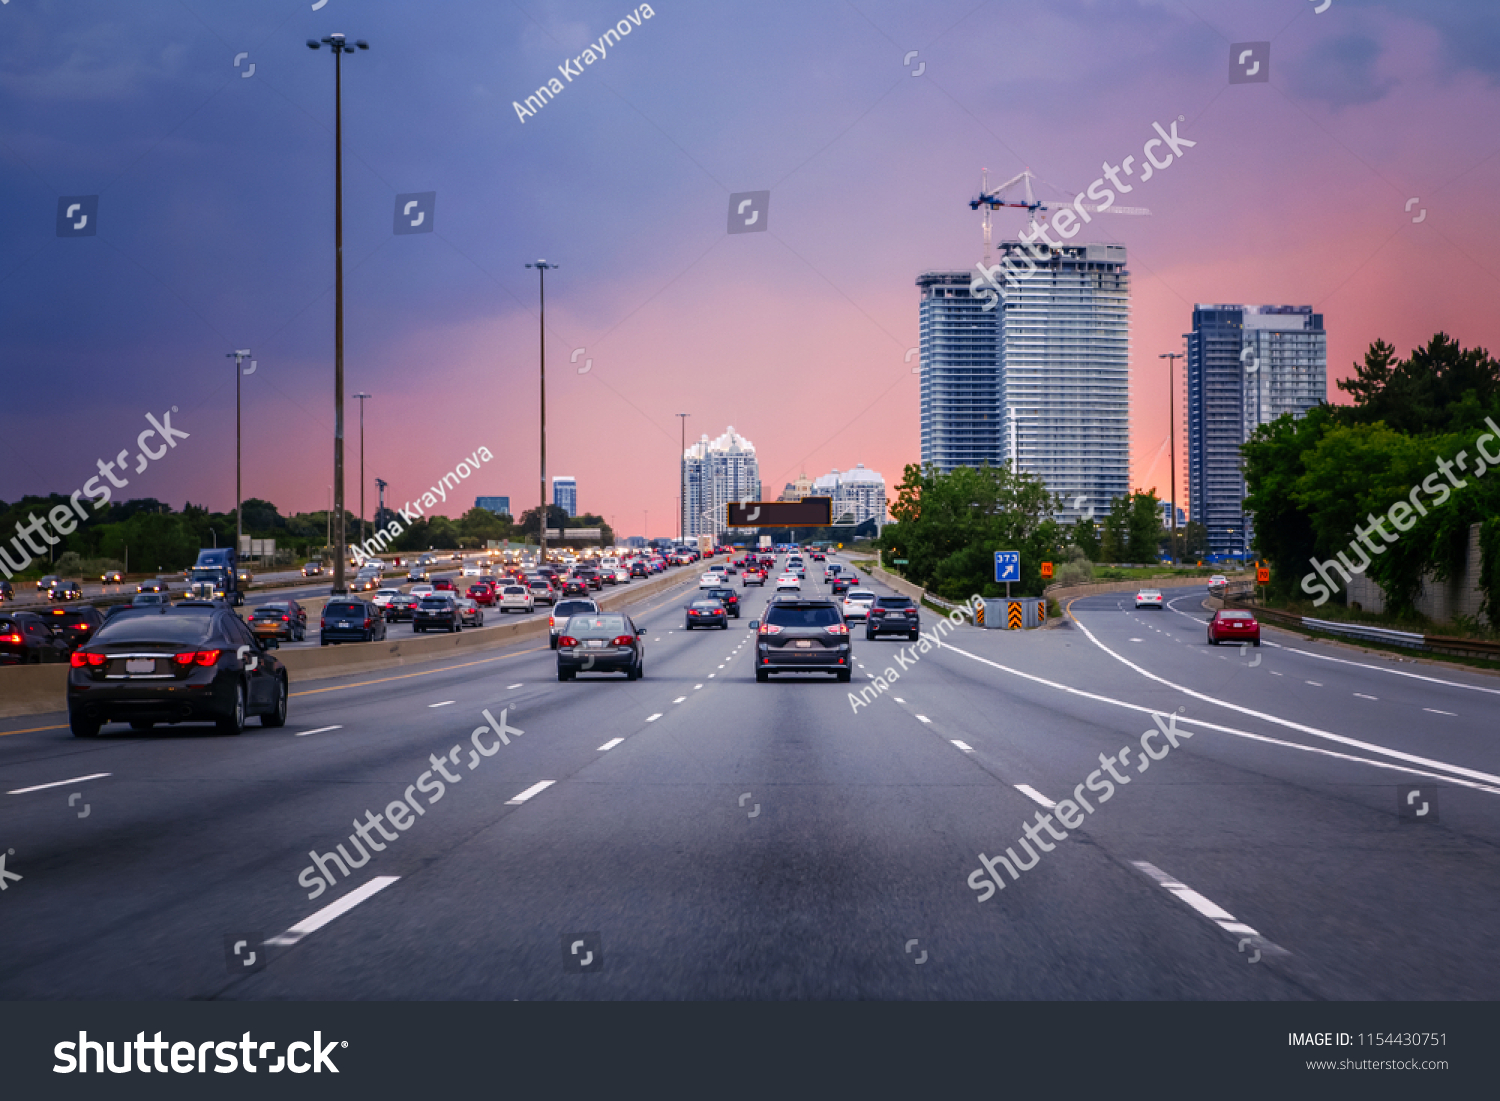 Night traffic. Cars on highway road at sunset evening in typical busy american city. Beautiful amazing night urban view with red, yellow and blue sky clouds. Sundown in downtown. #1154430751